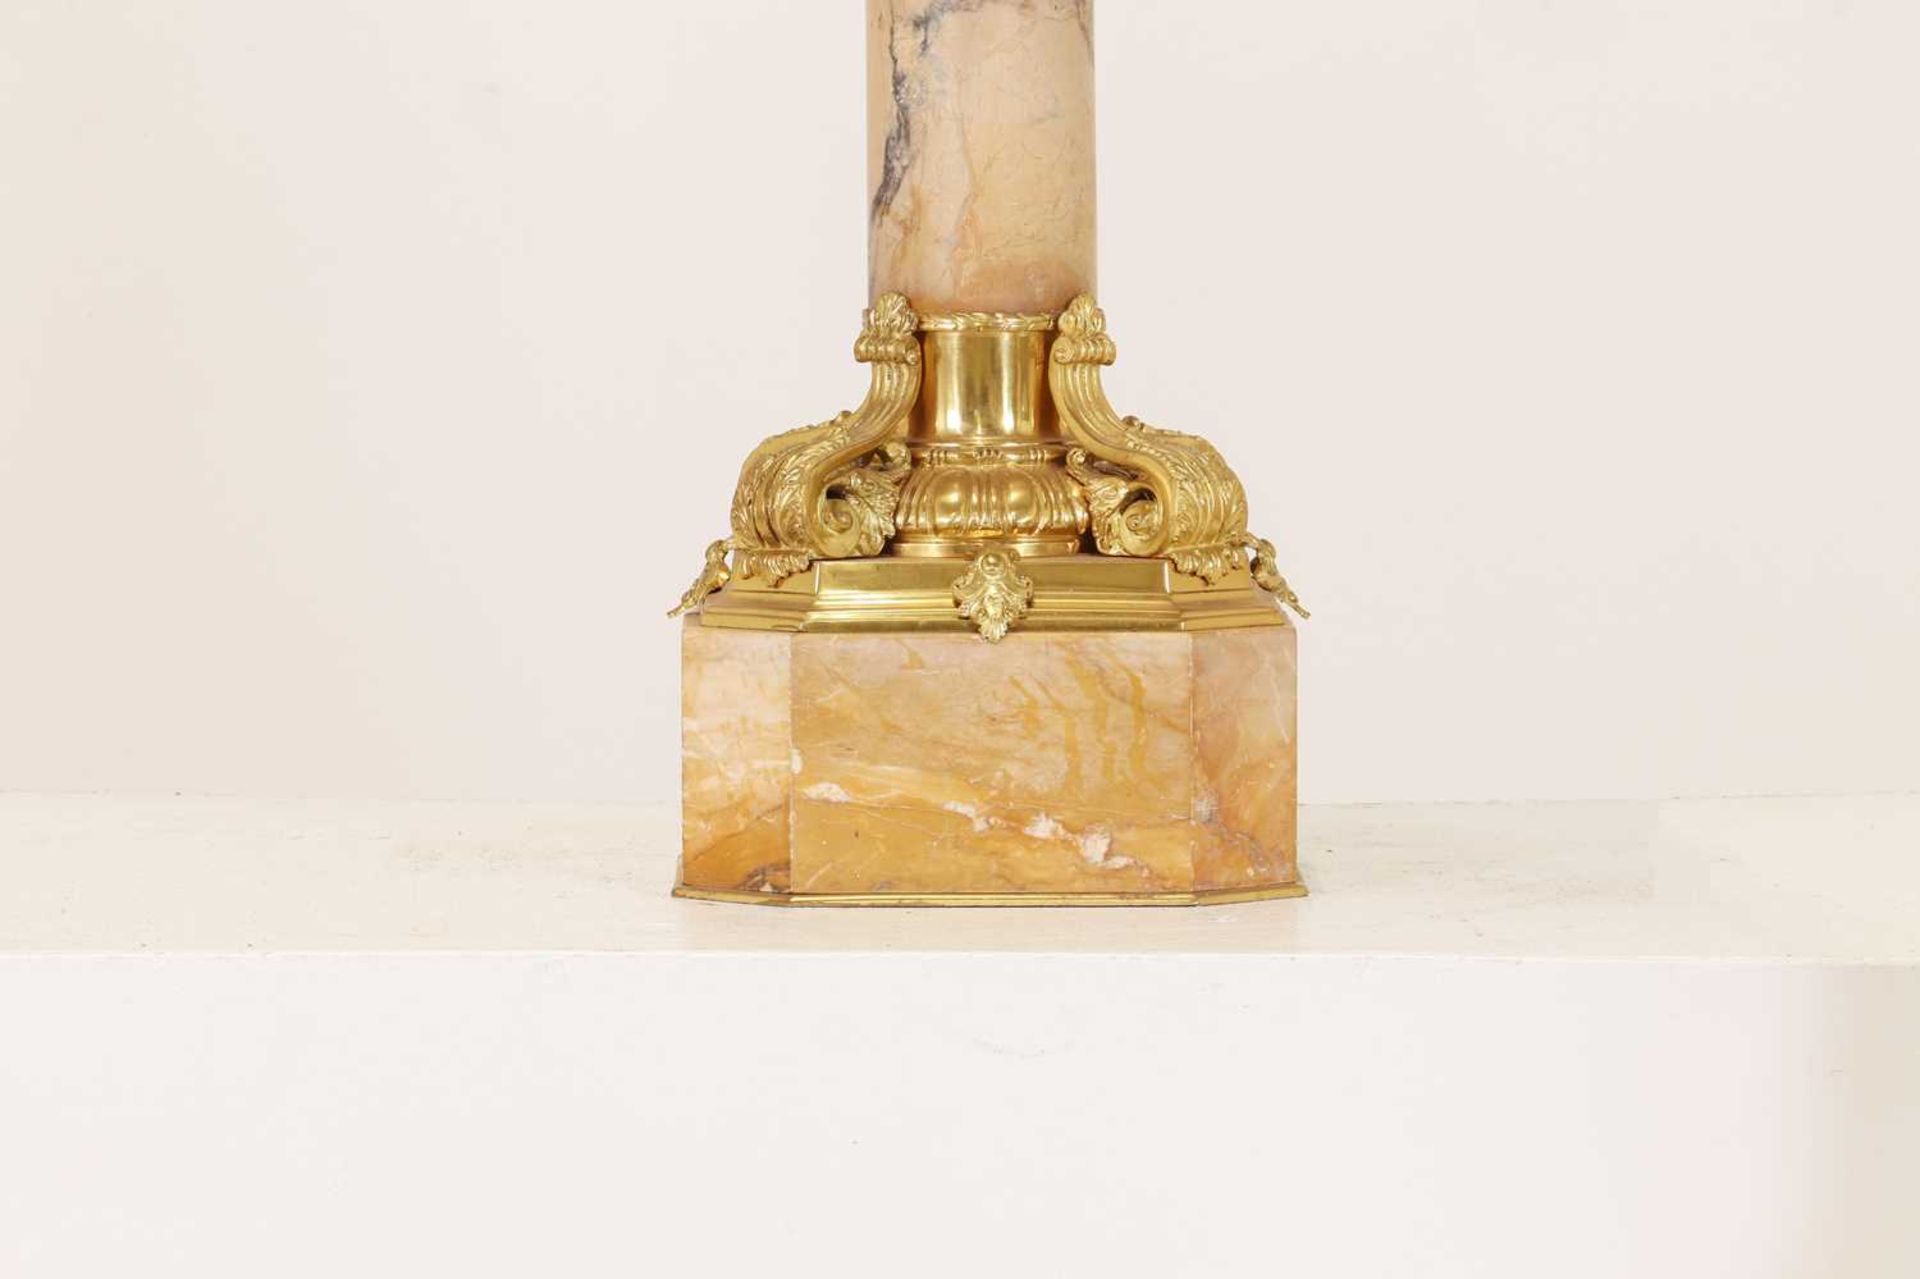 A pair of giallo antico marble pedestals, - Image 4 of 9